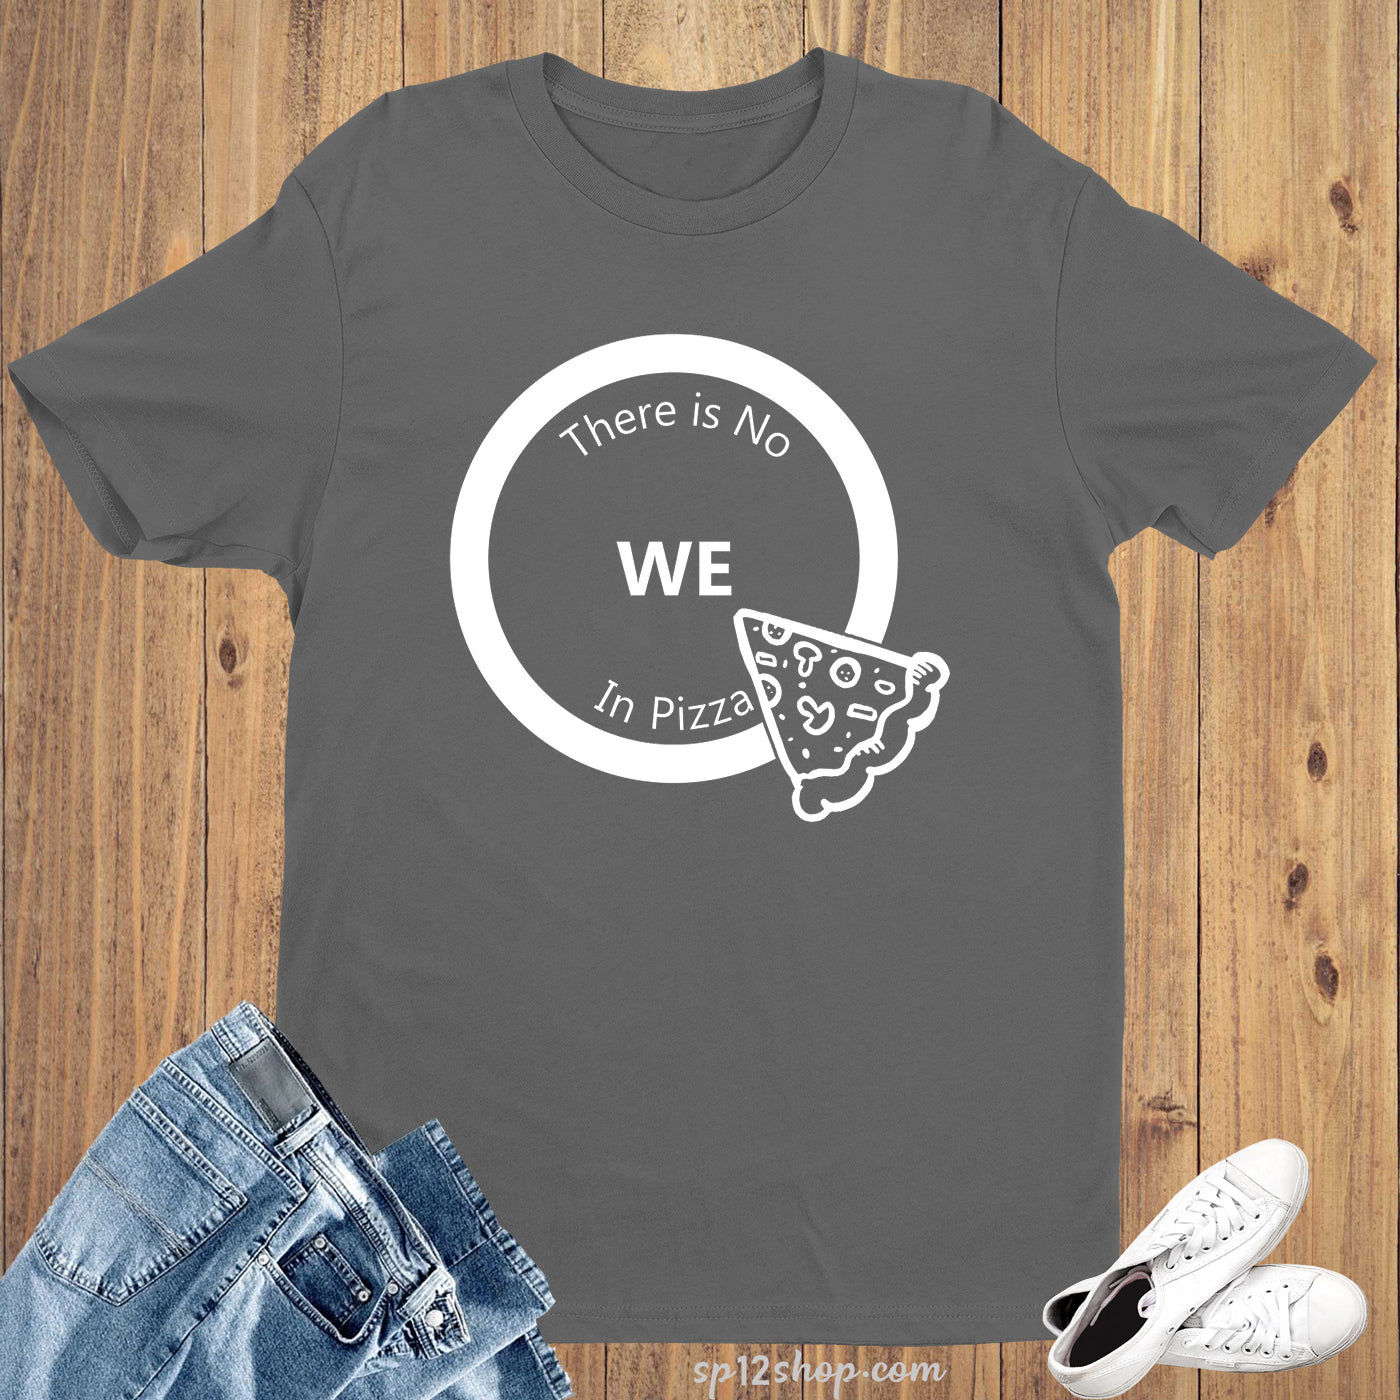 No We in Pizza Funny Humorous Comical Slogan T shirt